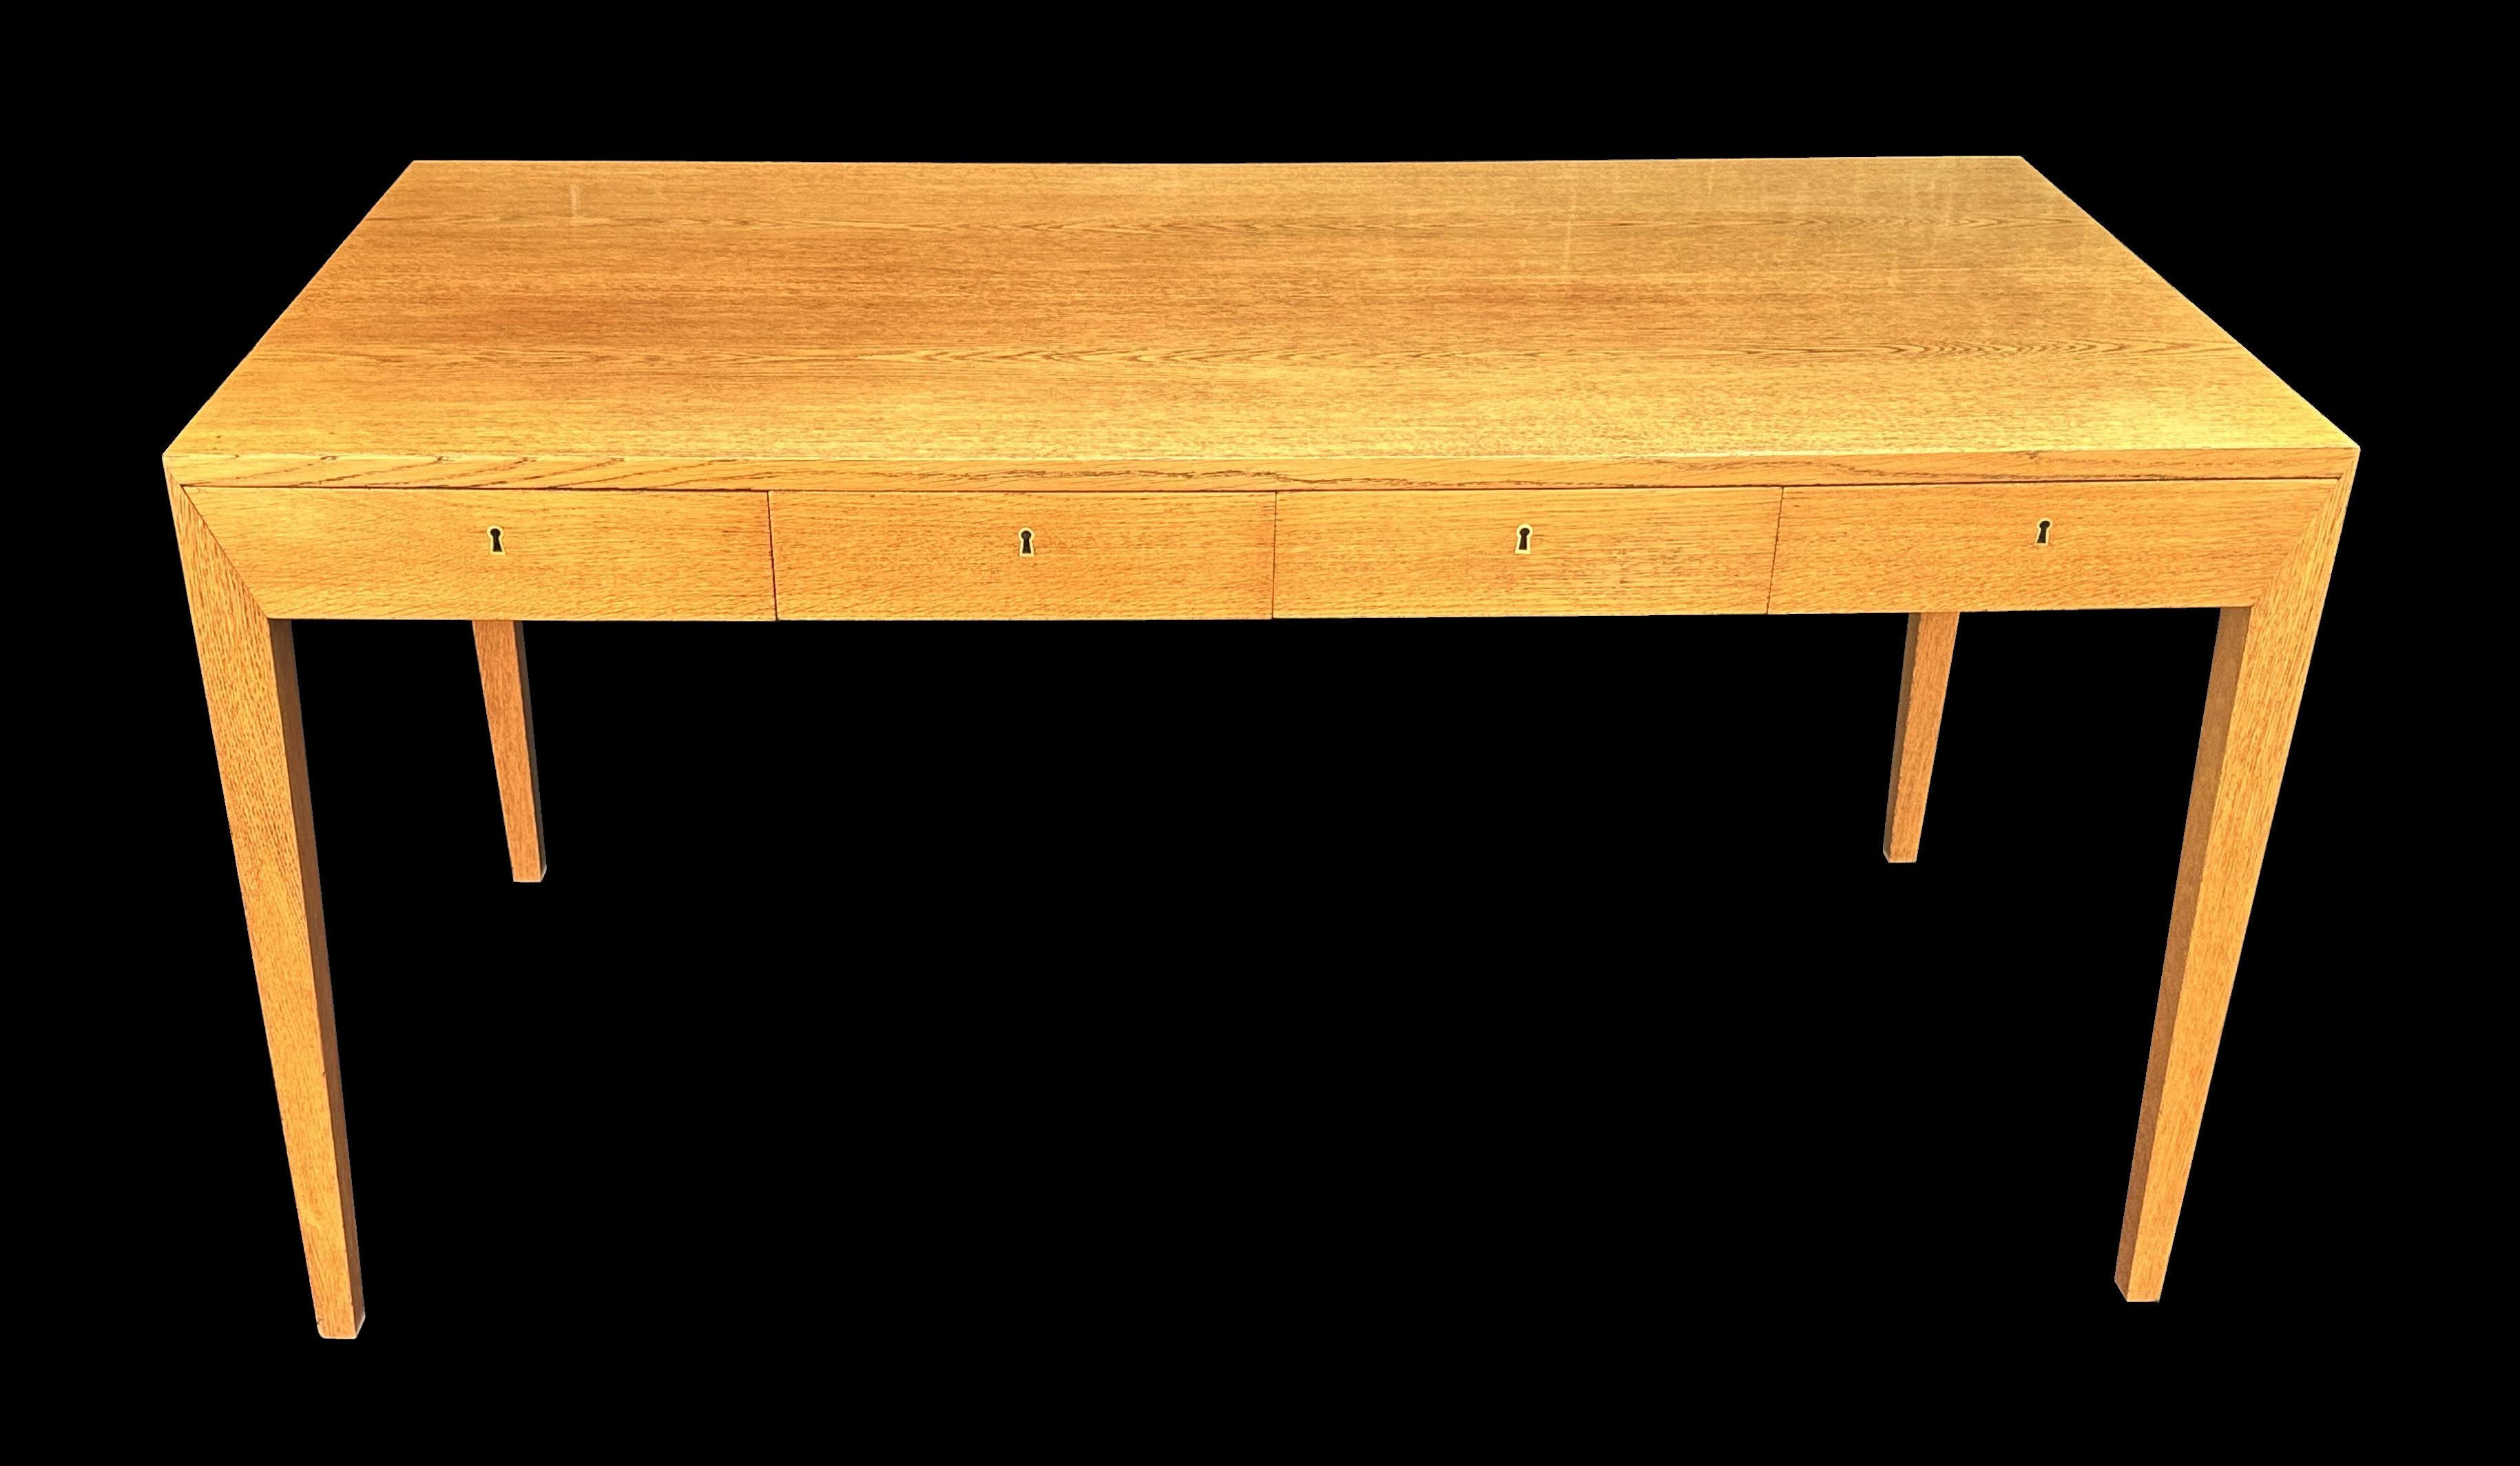 A beautiful example of this classic Scandinavian Modern design, a great example of form and function. This is the more desireable 4 drawer version in pale golden Oak and is in great condition.